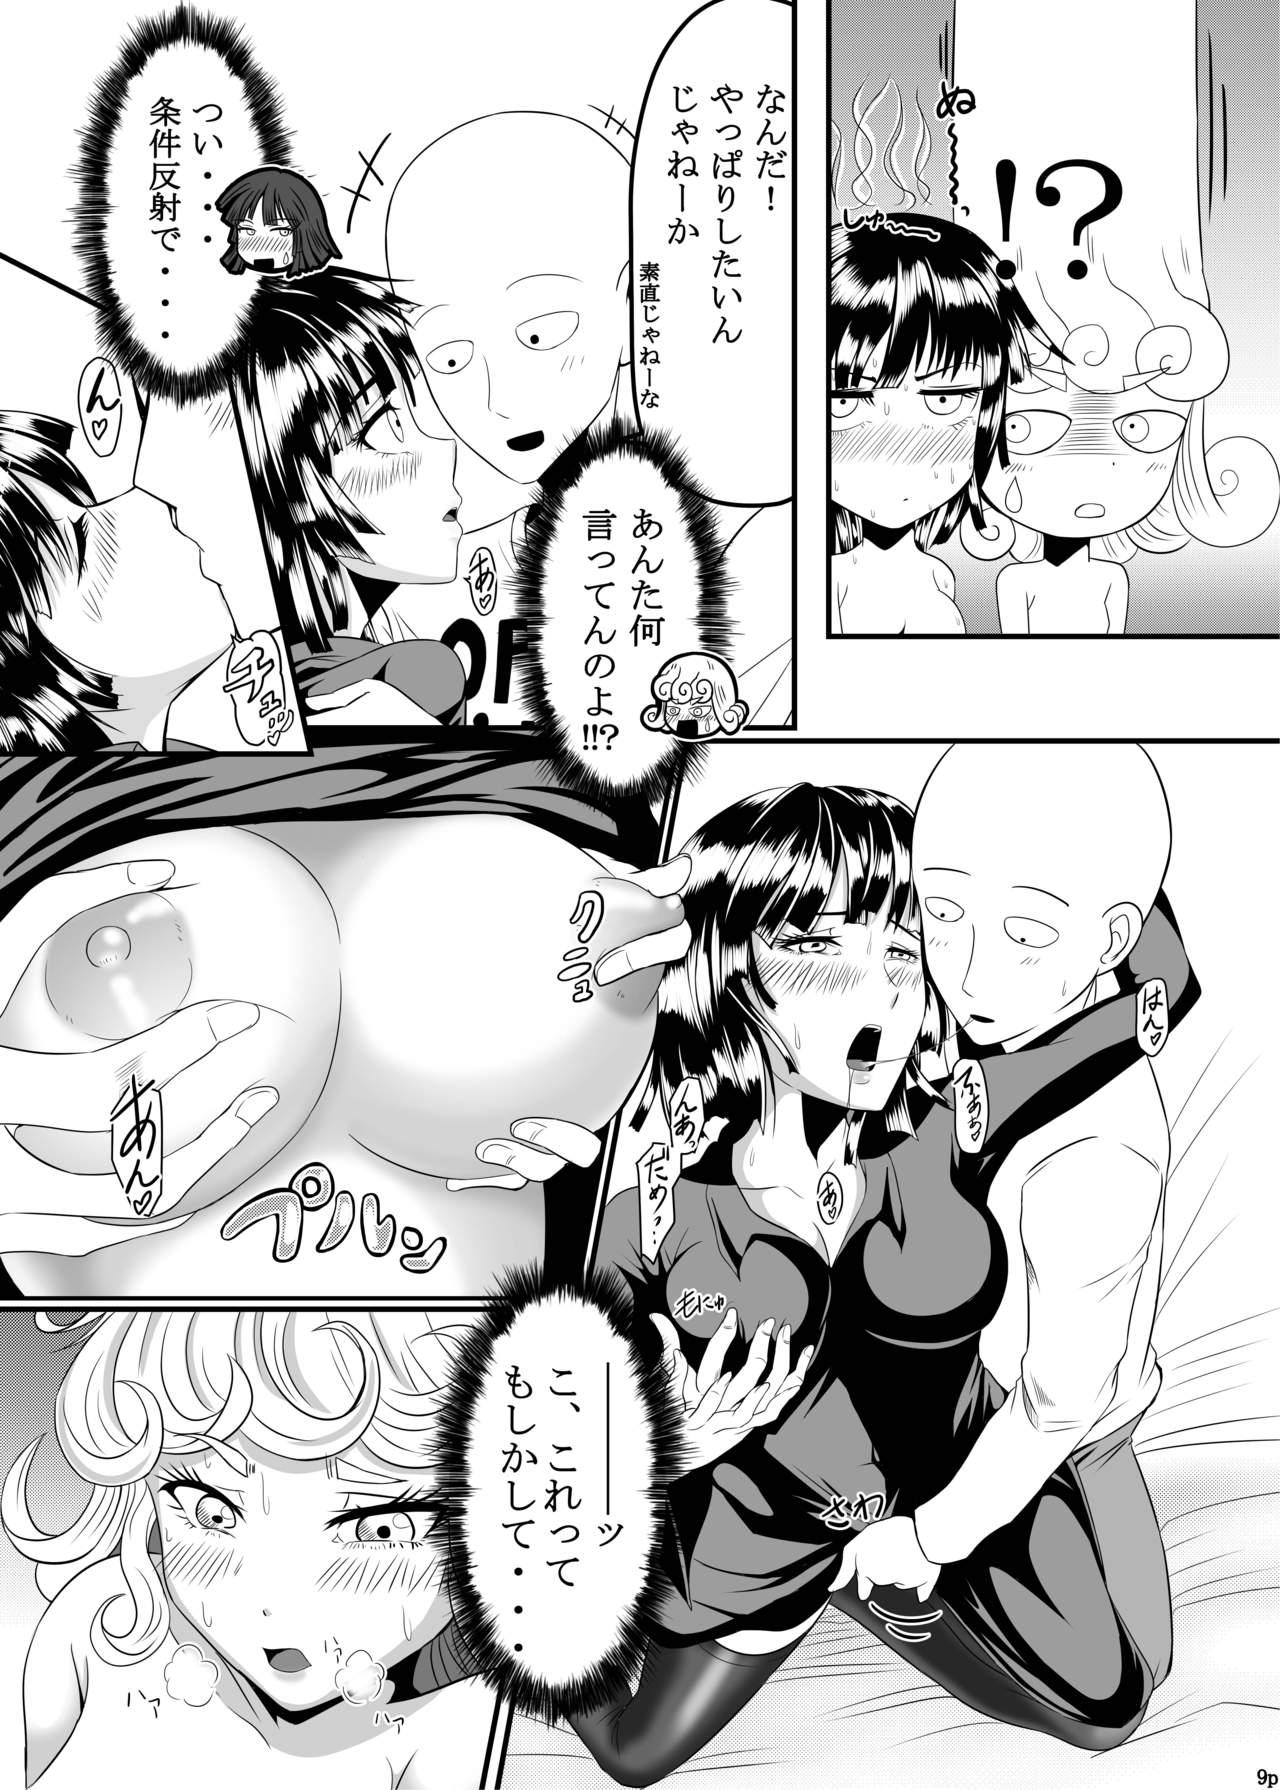 Exposed Dekoboko Love sister - One punch man Tight Cunt - Page 9